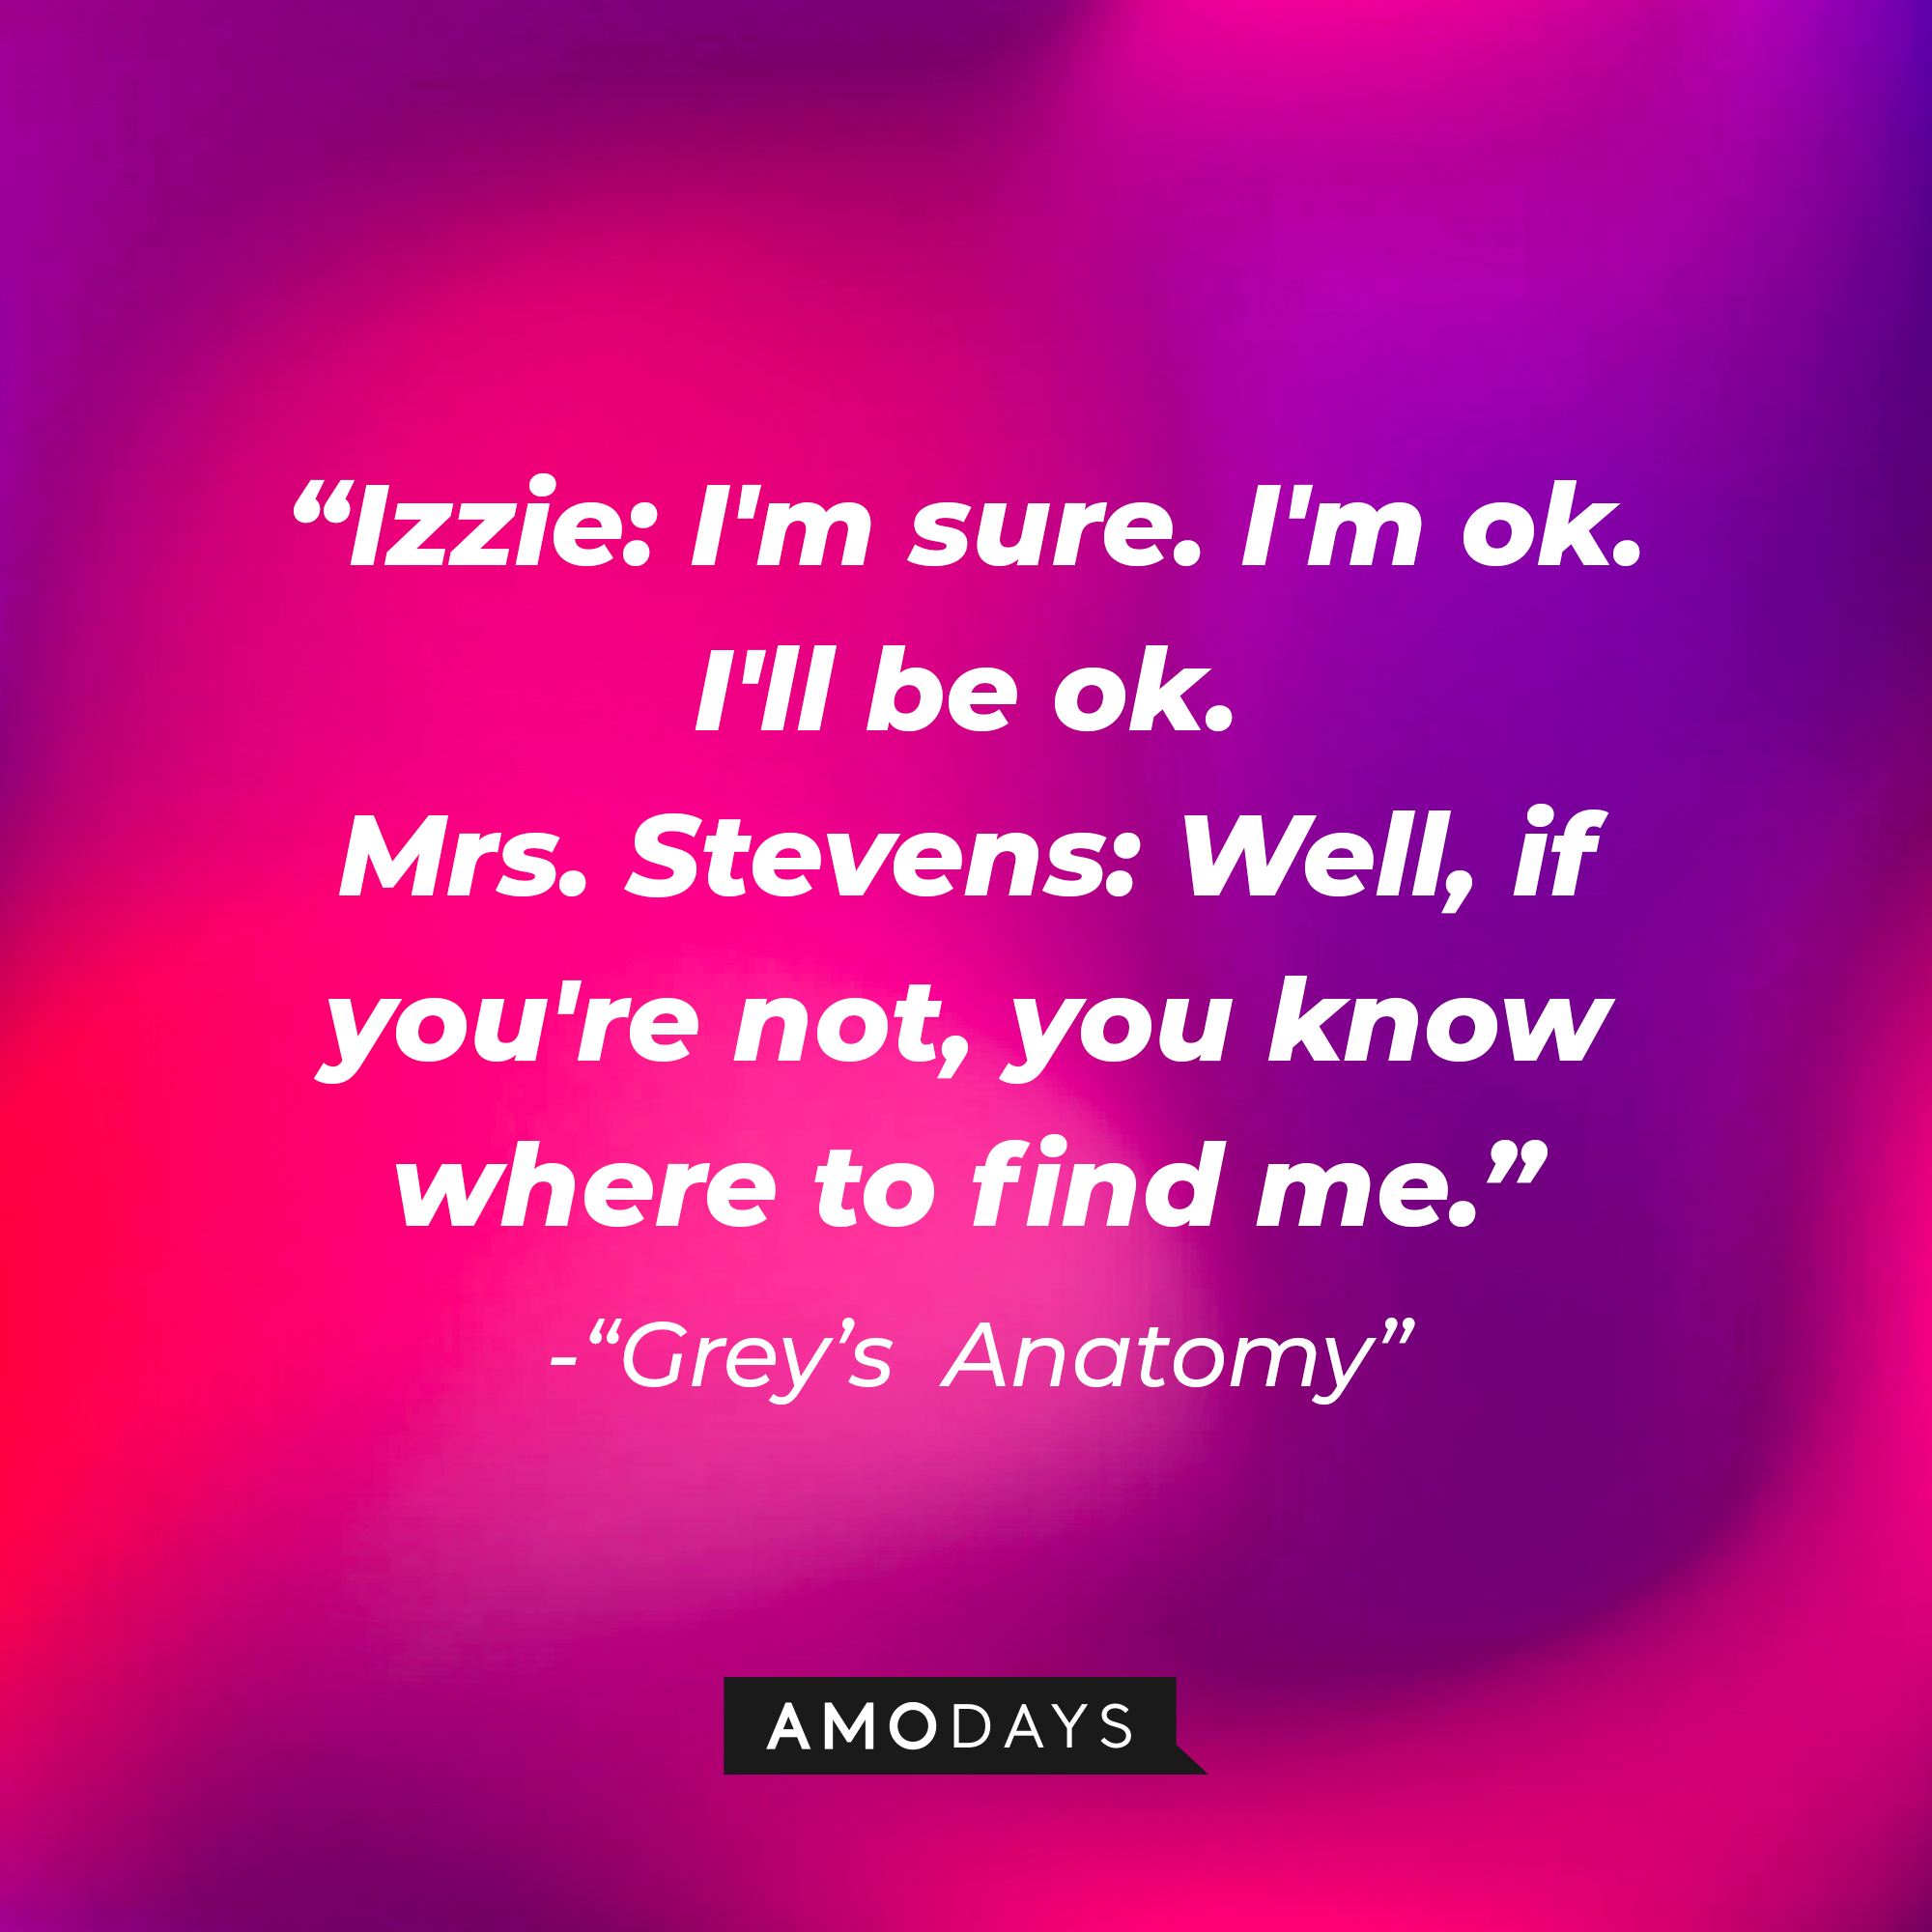 Izzie Stevens' quote: "I'm sure. I'm ok. 'll be ok." Mrs Stevens" "Well, if you're not, you know where to find me." | Image: Amodays